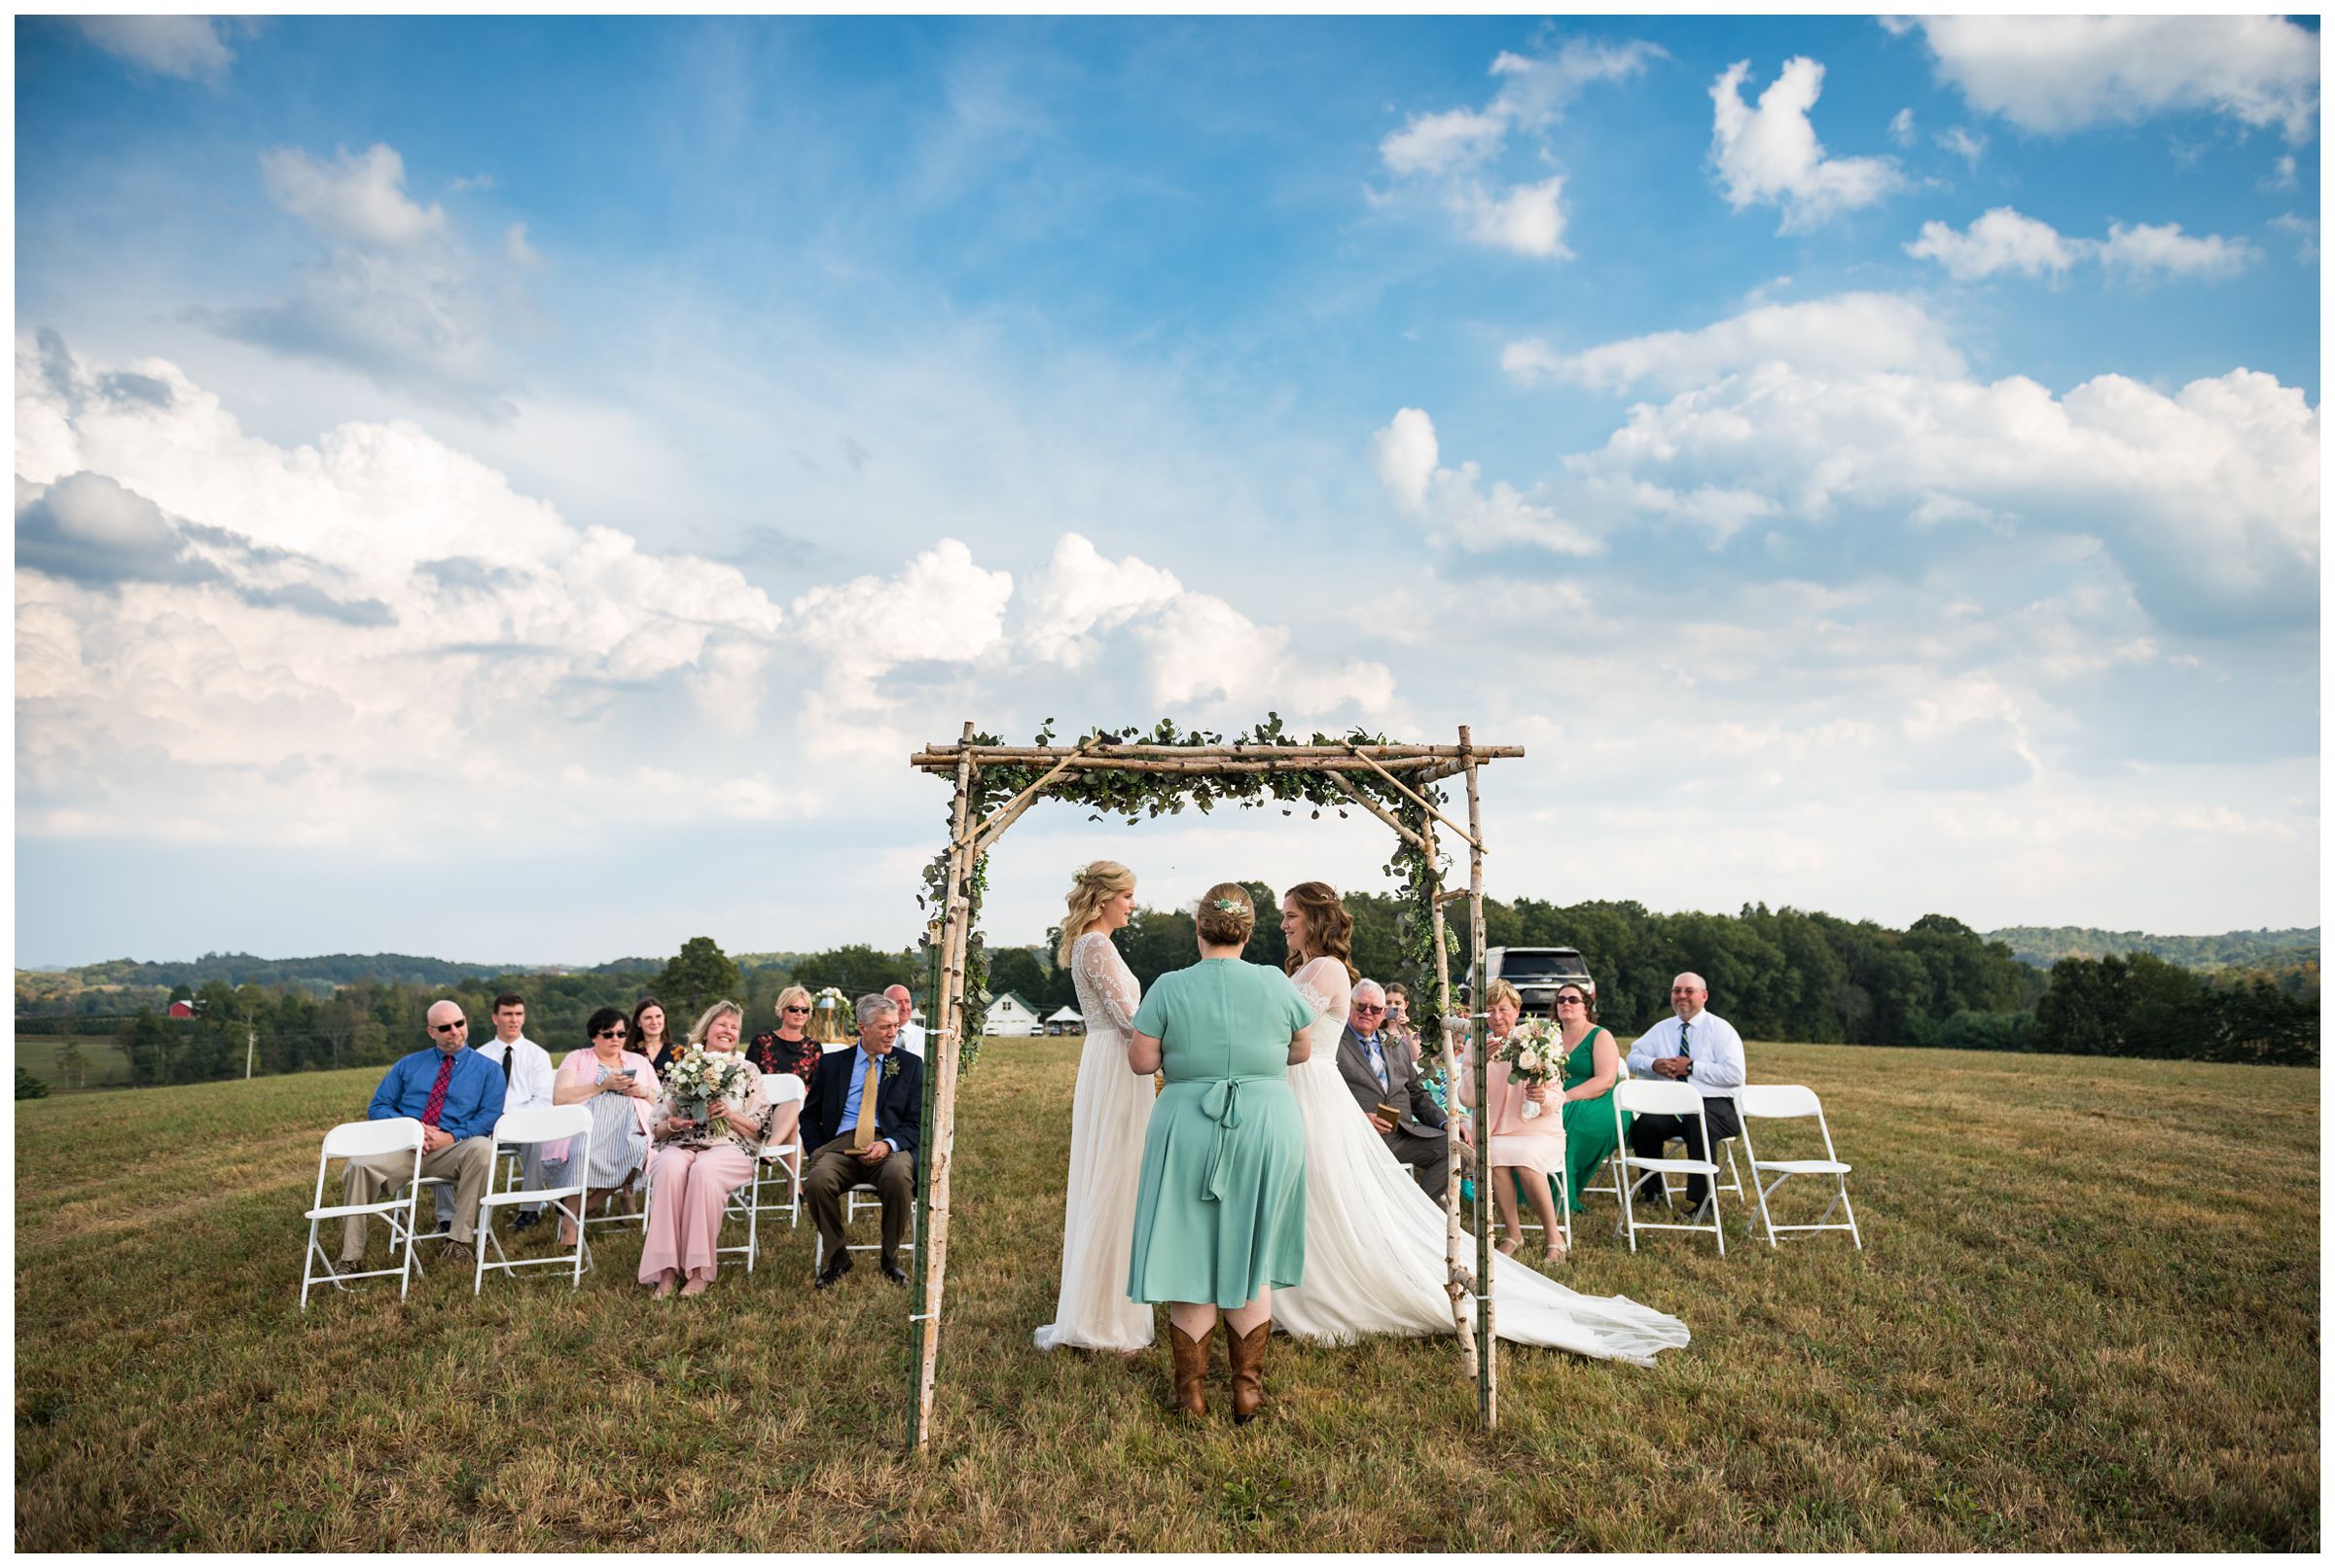 Intimate same-sex wedding ceremony with two brides on farm hilltop.